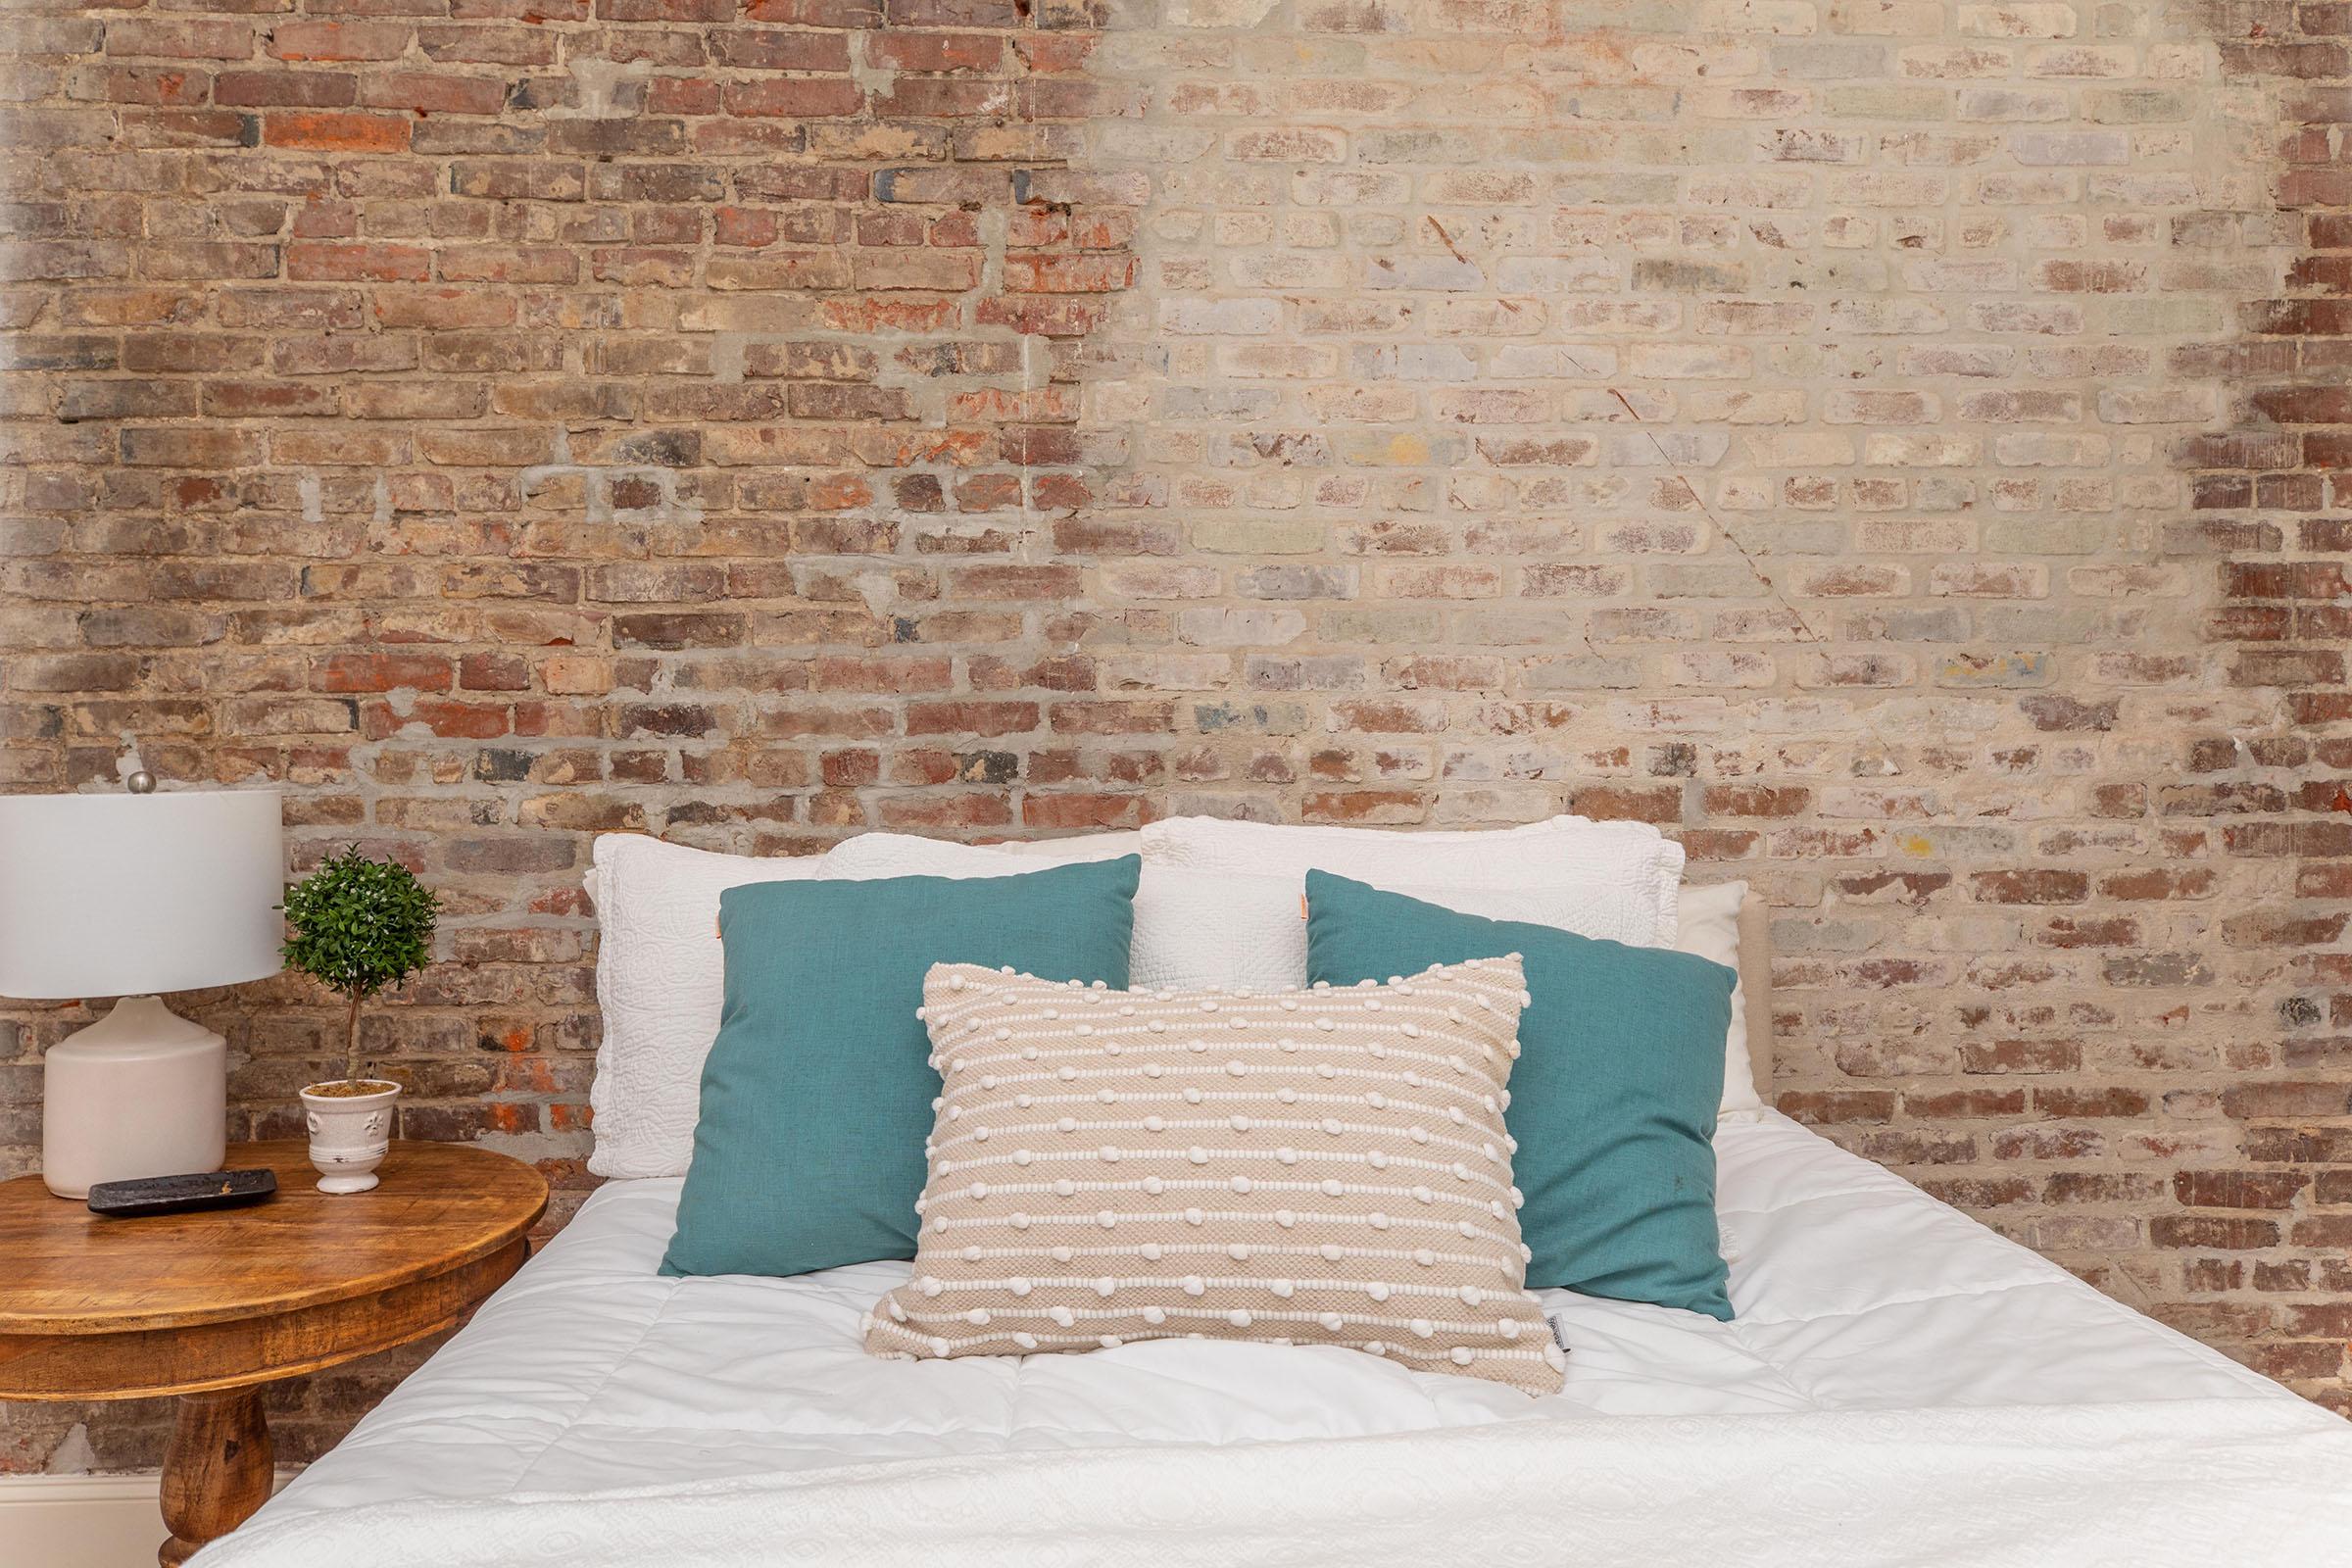 a bedroom with a brick wall